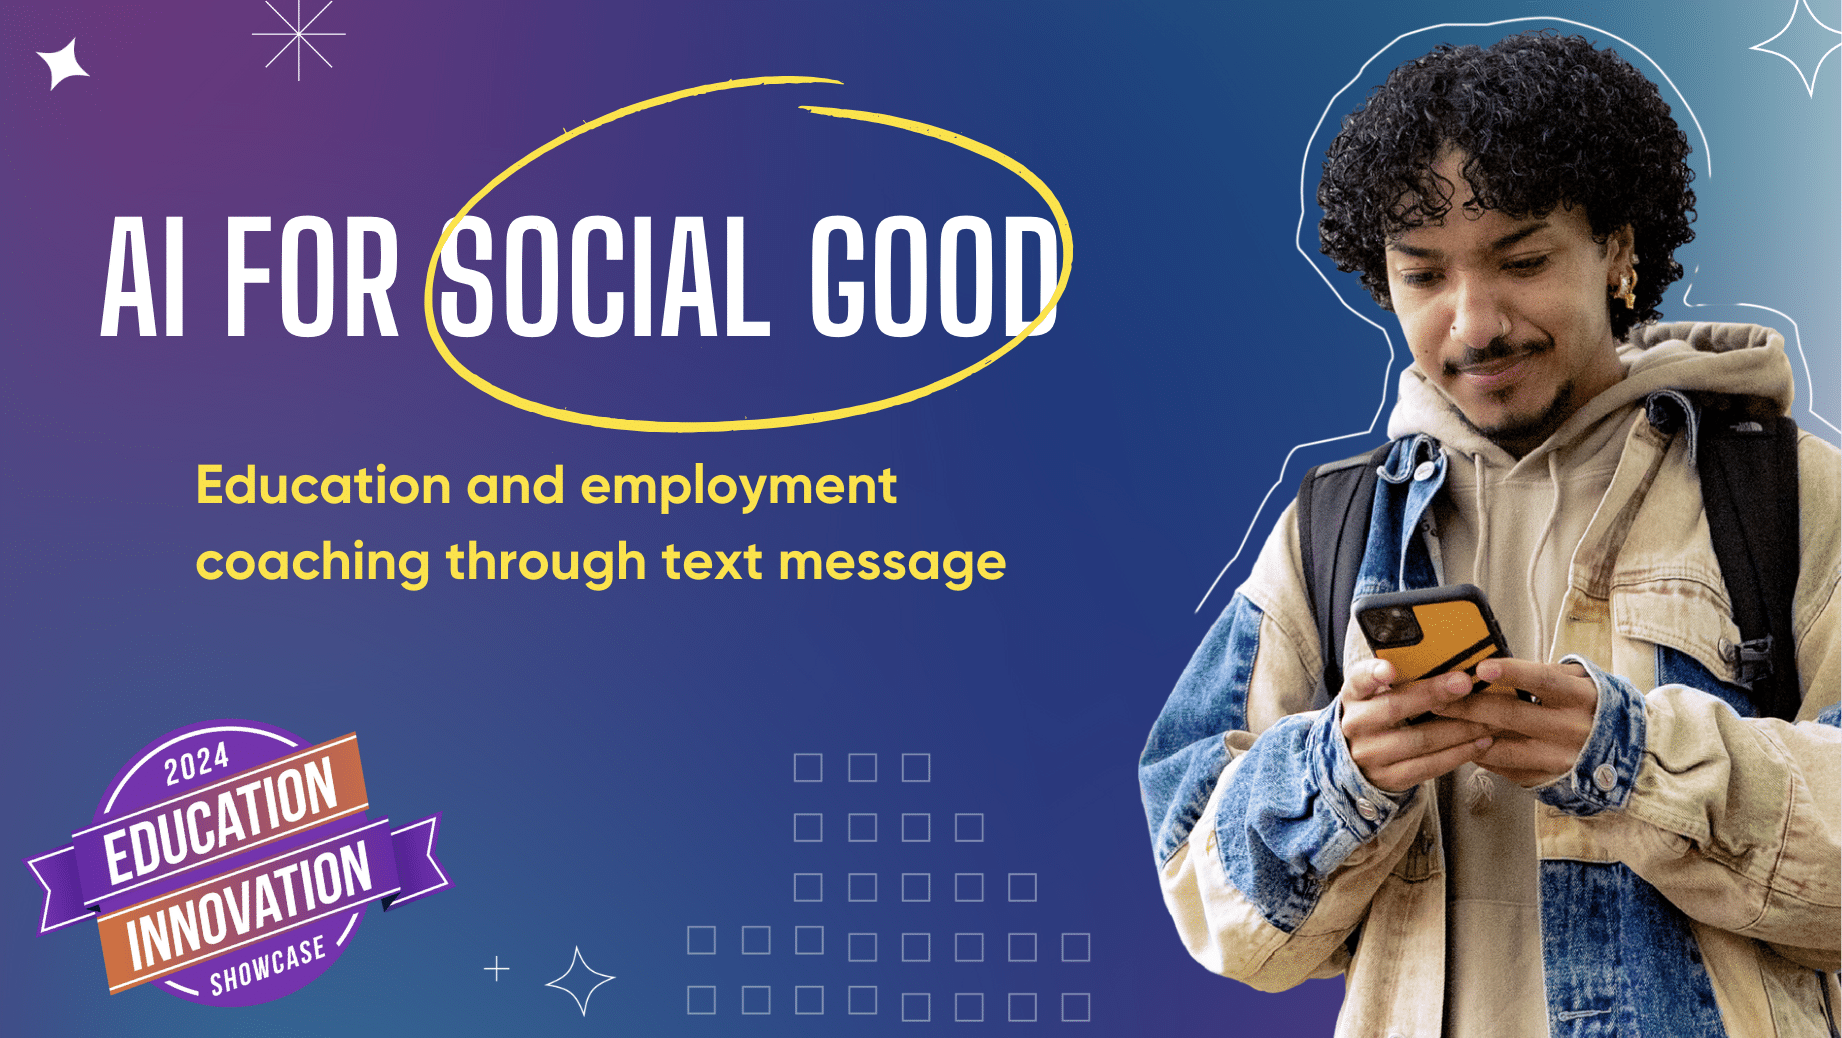 Purple and blue gradient graphic with photo of student texting on phone and text for AI for social good